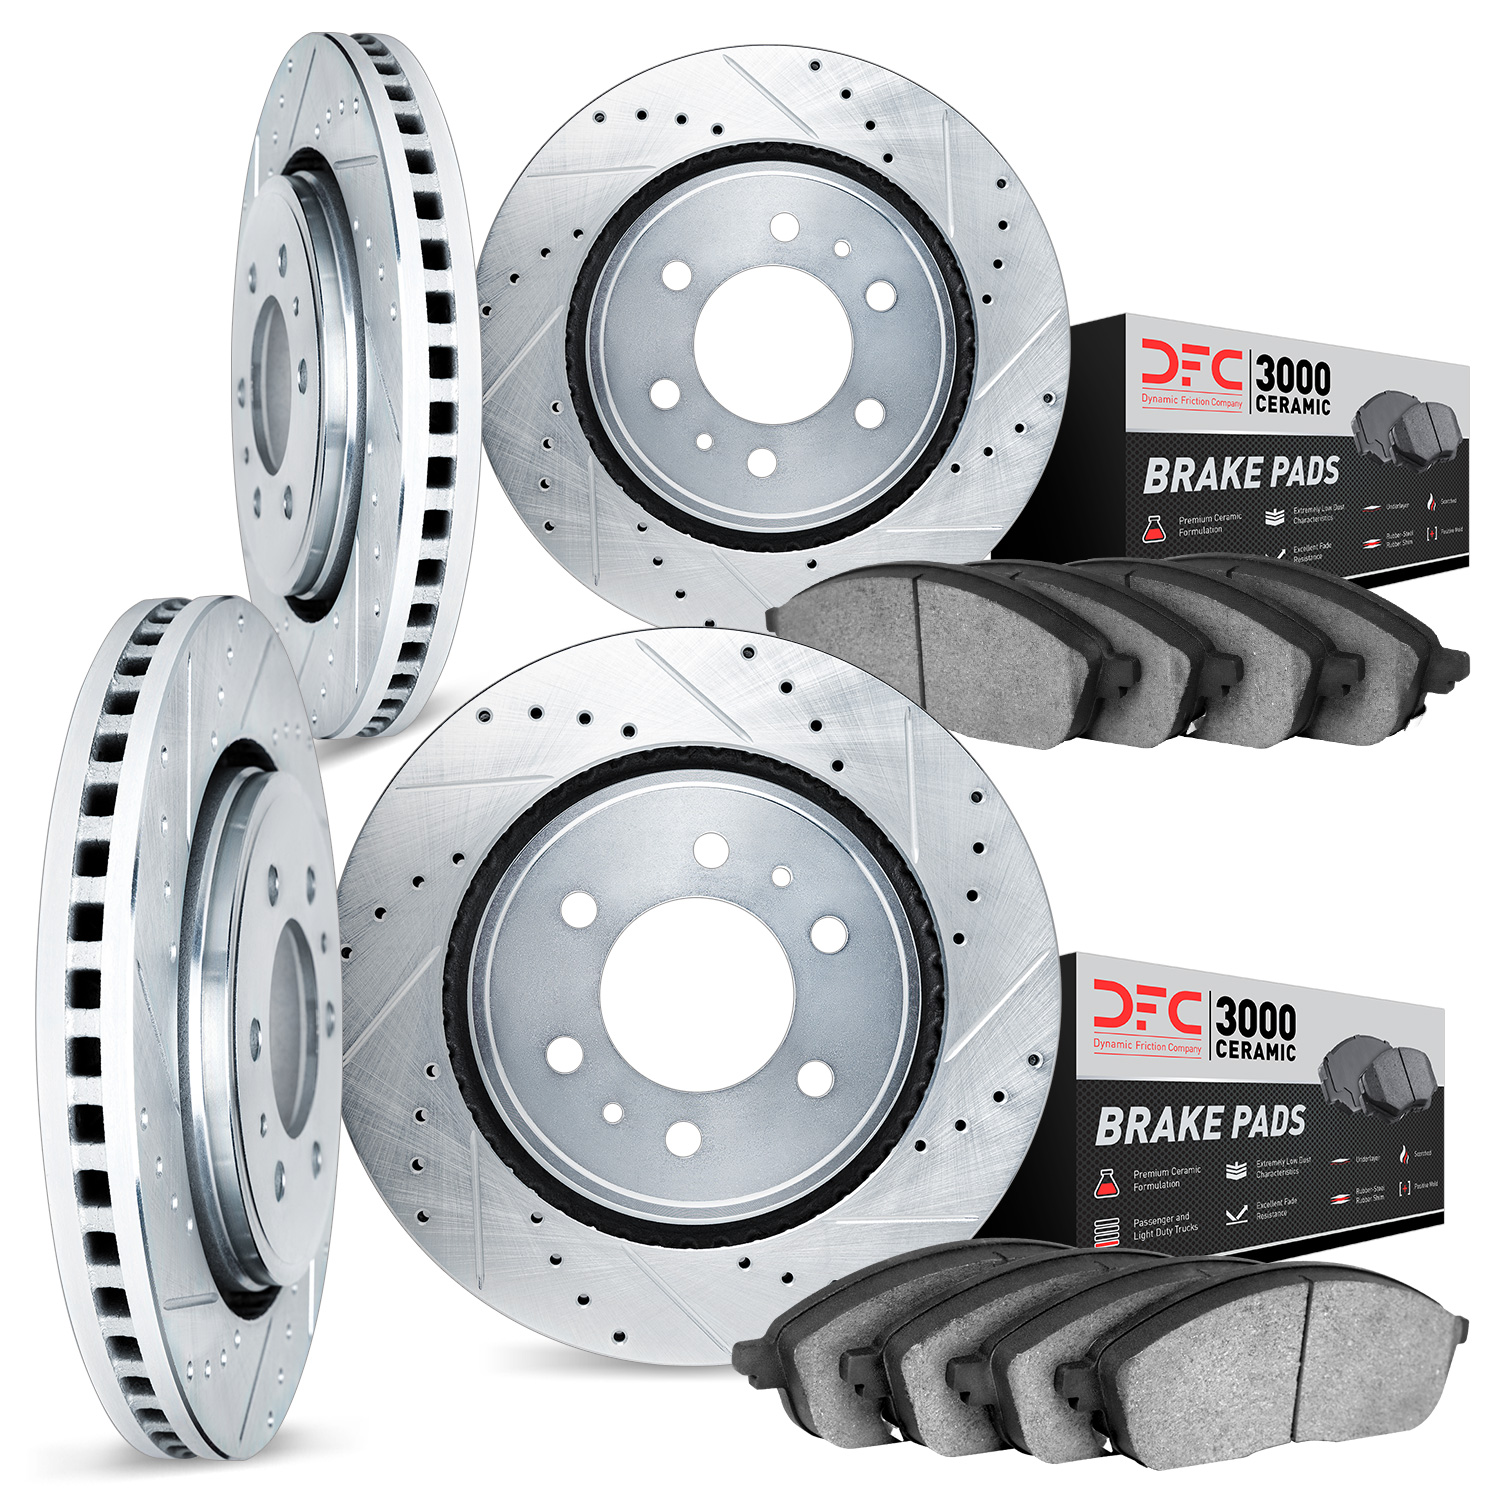 7304-76066 Drilled/Slotted Brake Rotor with 3000-Series Ceramic Brake Pads Kit [Silver], 2003-2009 Lexus/Toyota/Scion, Position: